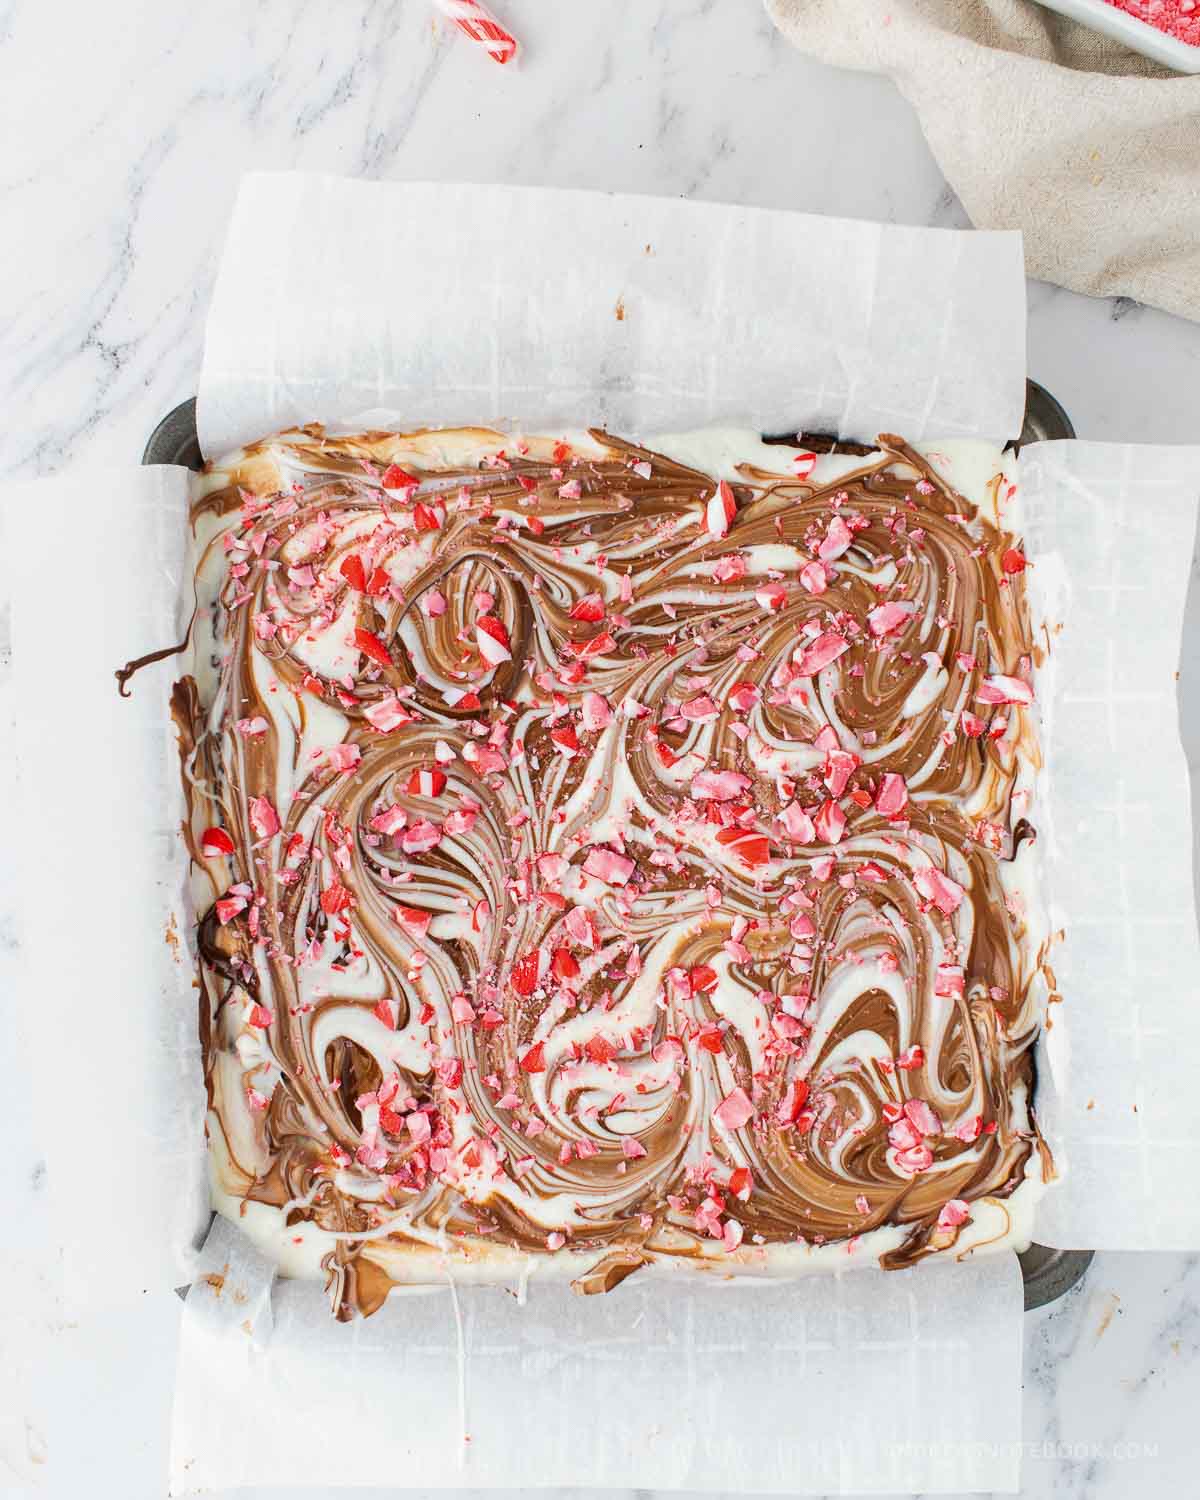 Crushed candy canes sprinkled on top of peppermint bark brownies.